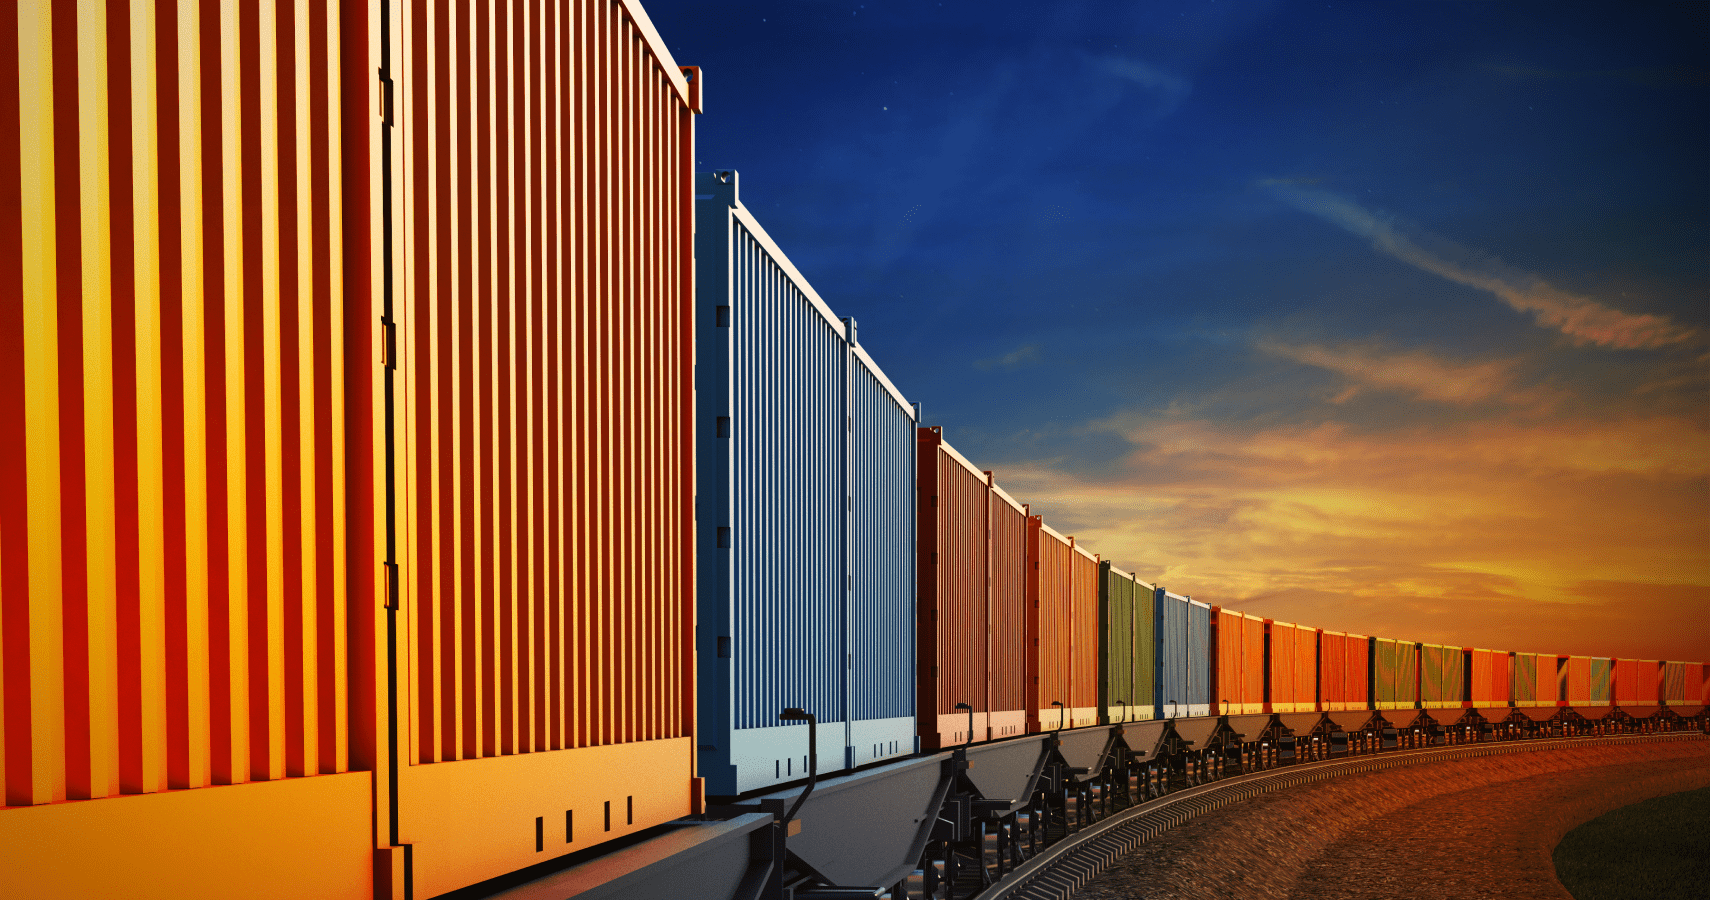 An intermodal rail car carrying brightly colored freight during a sunset.